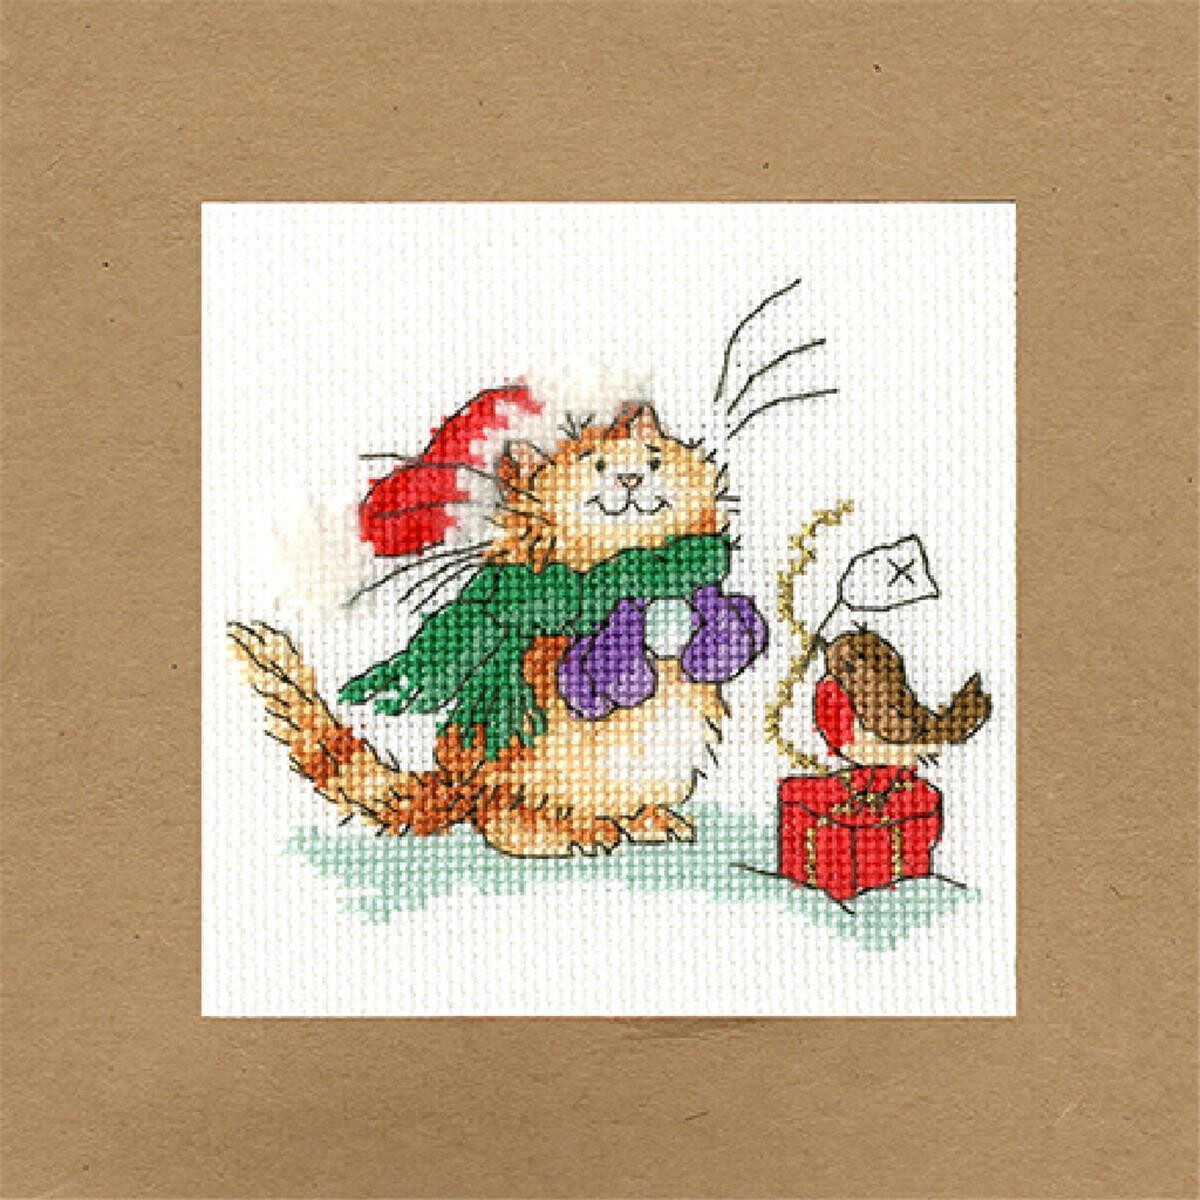 An enchanting cross stitch picture shows a fluffy orange...